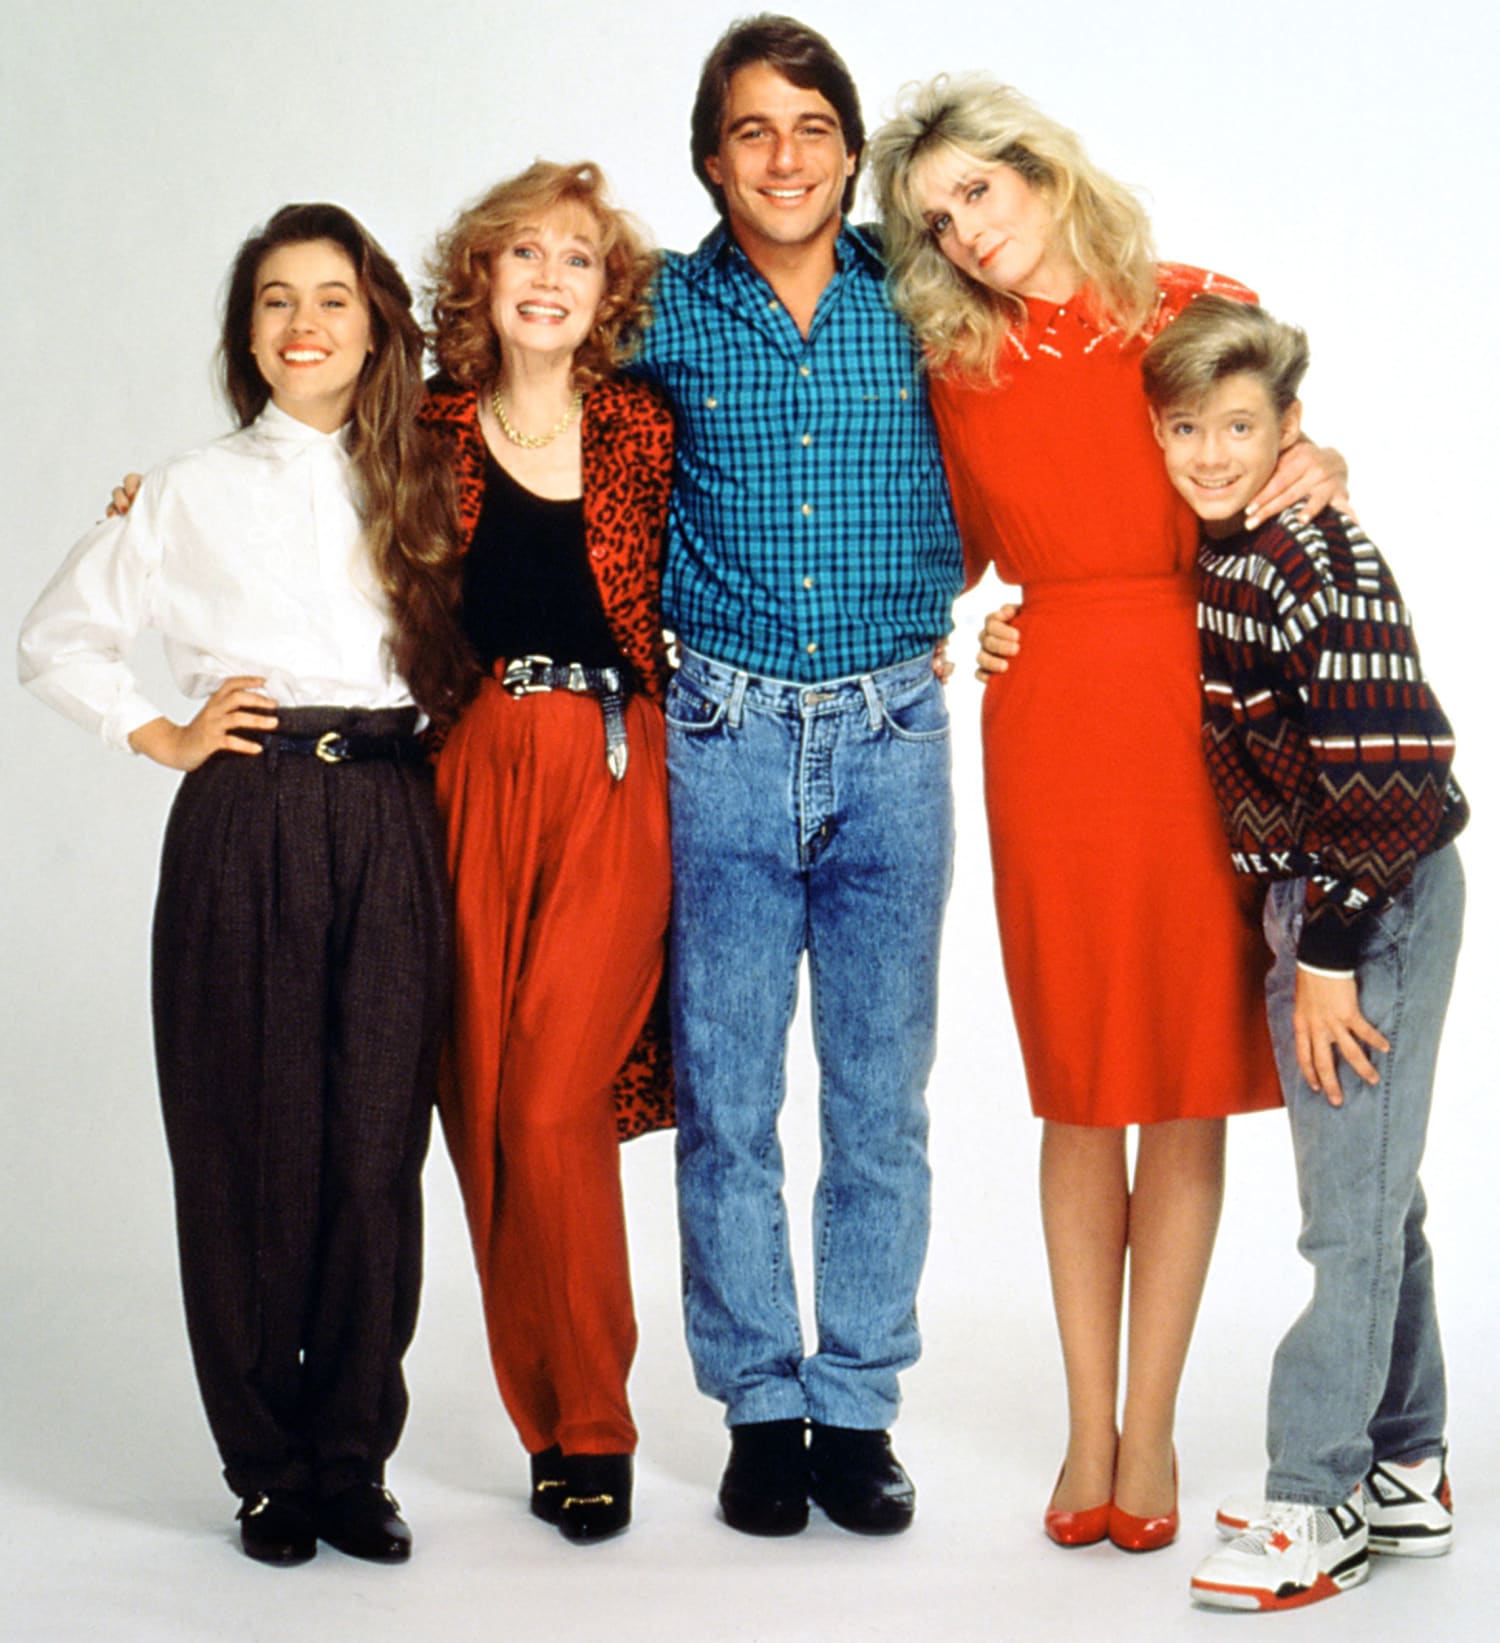 ufravigelige Kemi træk vejret Happy 65th birthday, Tony Danza! See the 'Who's the Boss?' cast then and now